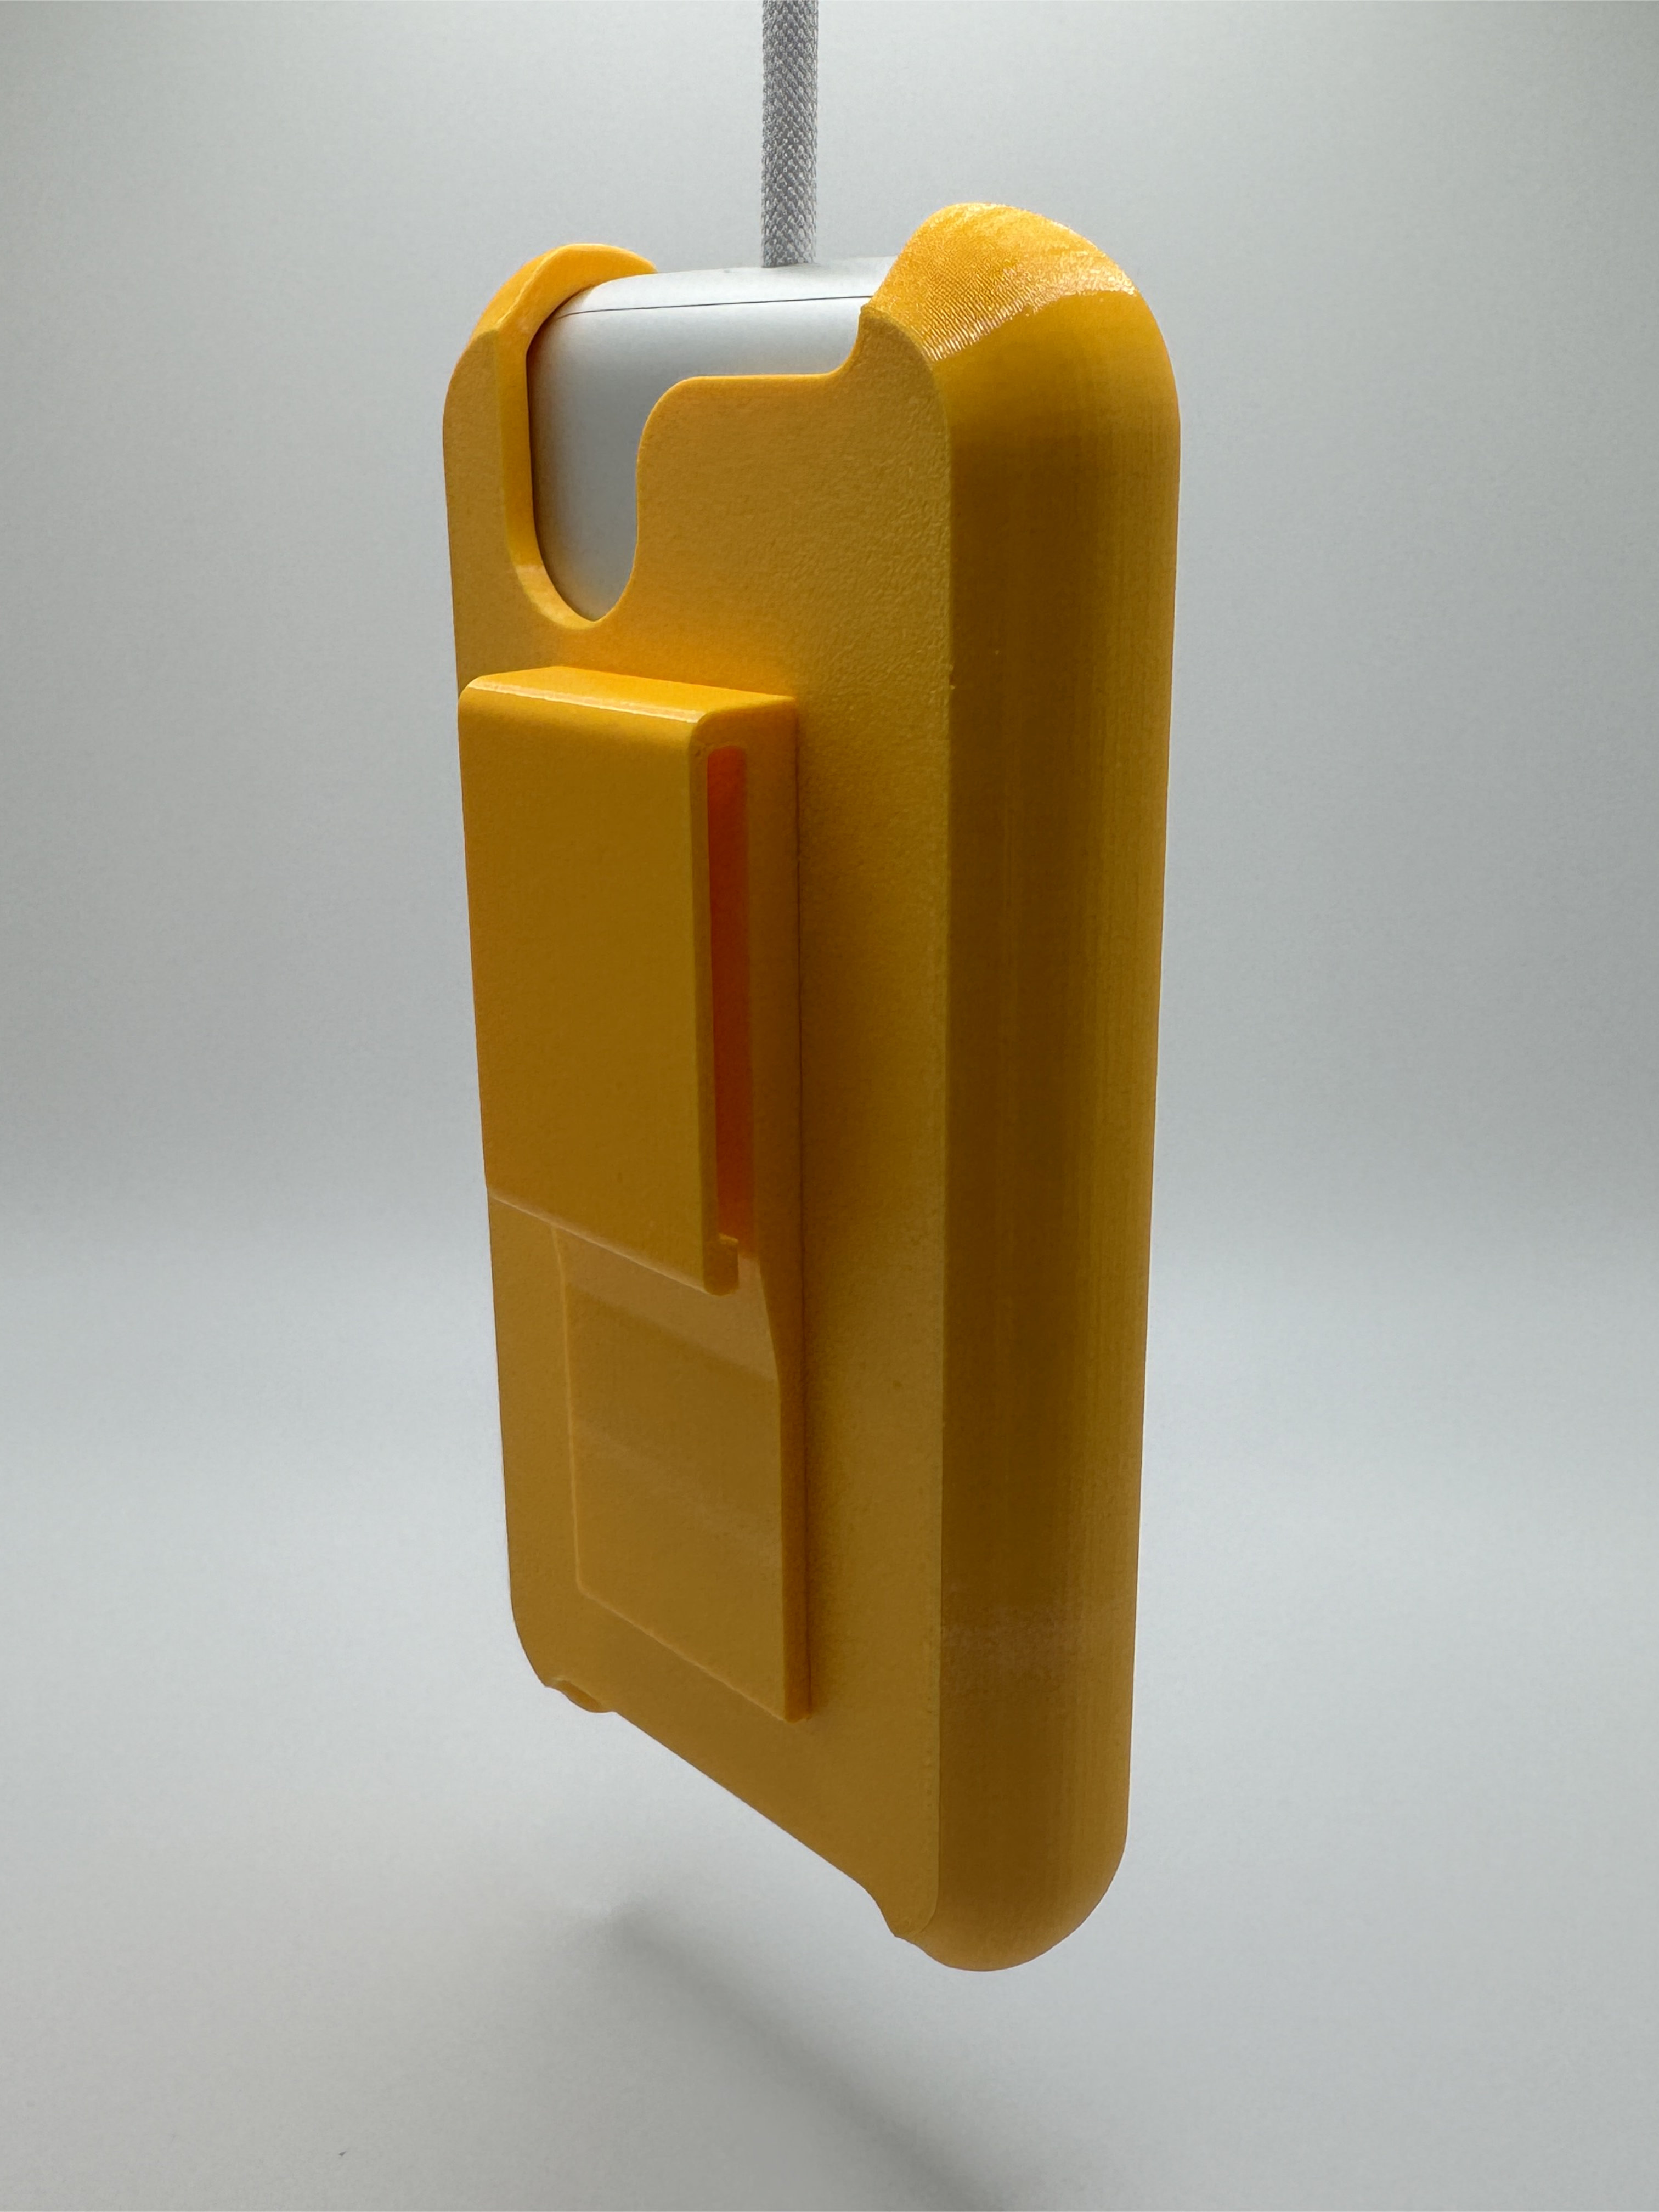 A picture of the holder in Yellow